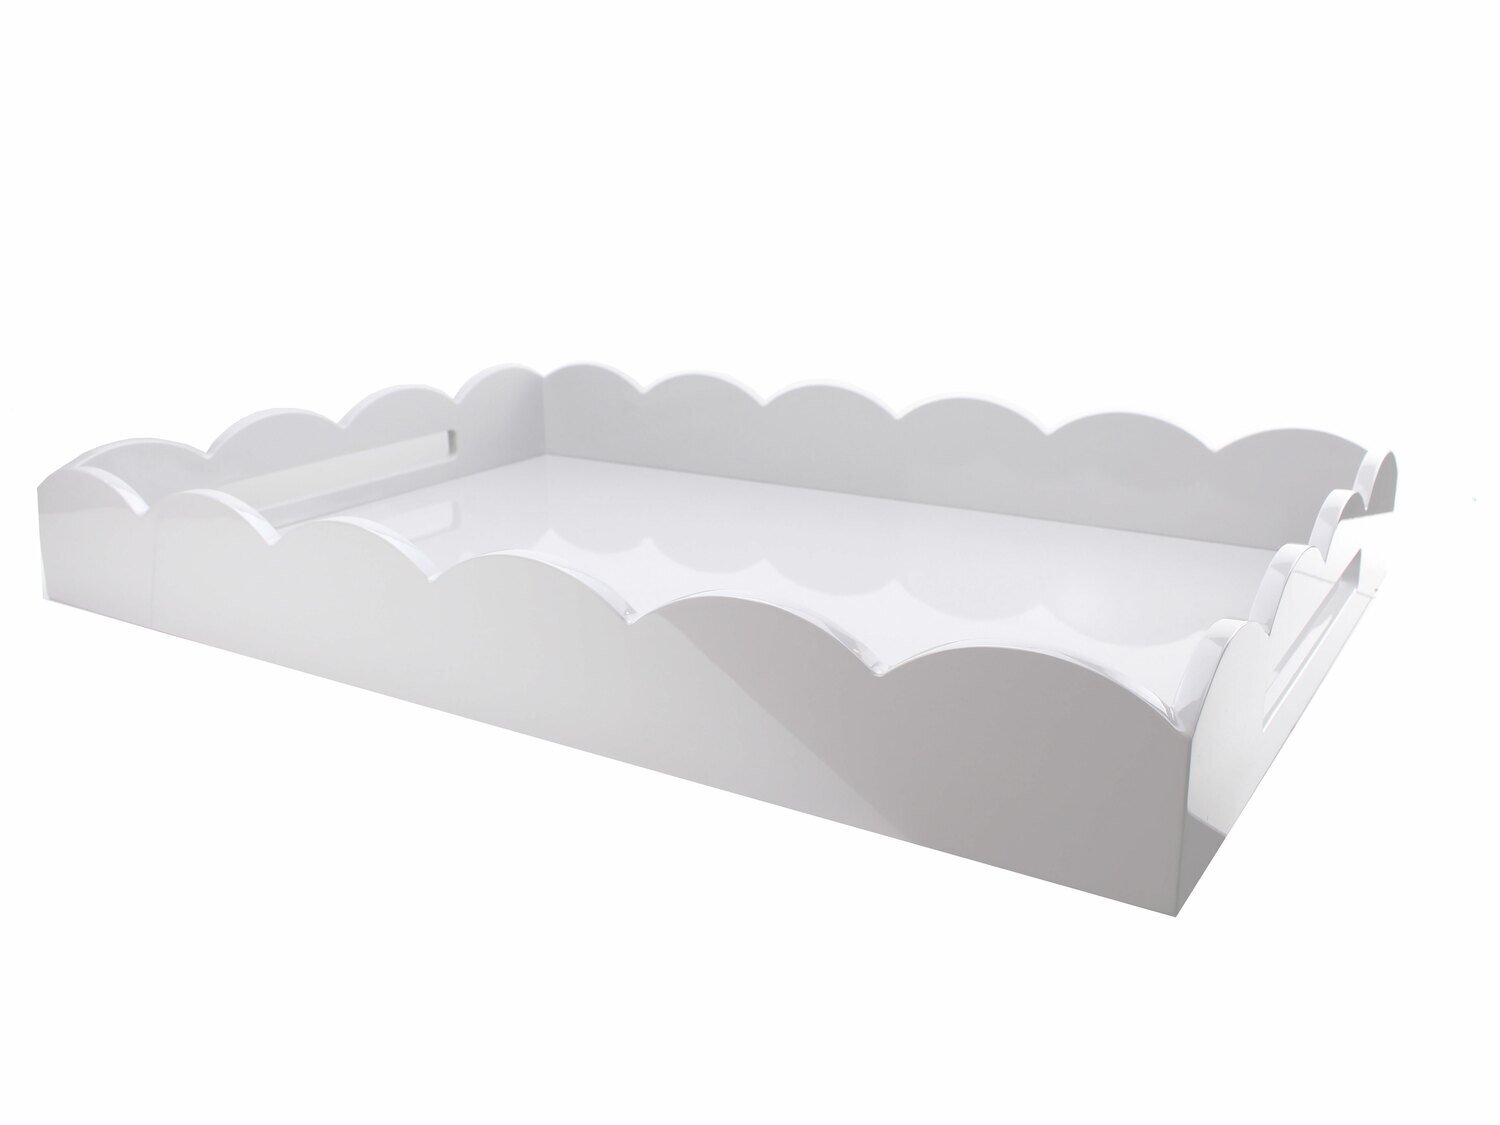 Addison Ross Large White Scalloped Edge Tray 26 x 17 Inch Lacquer TR3000